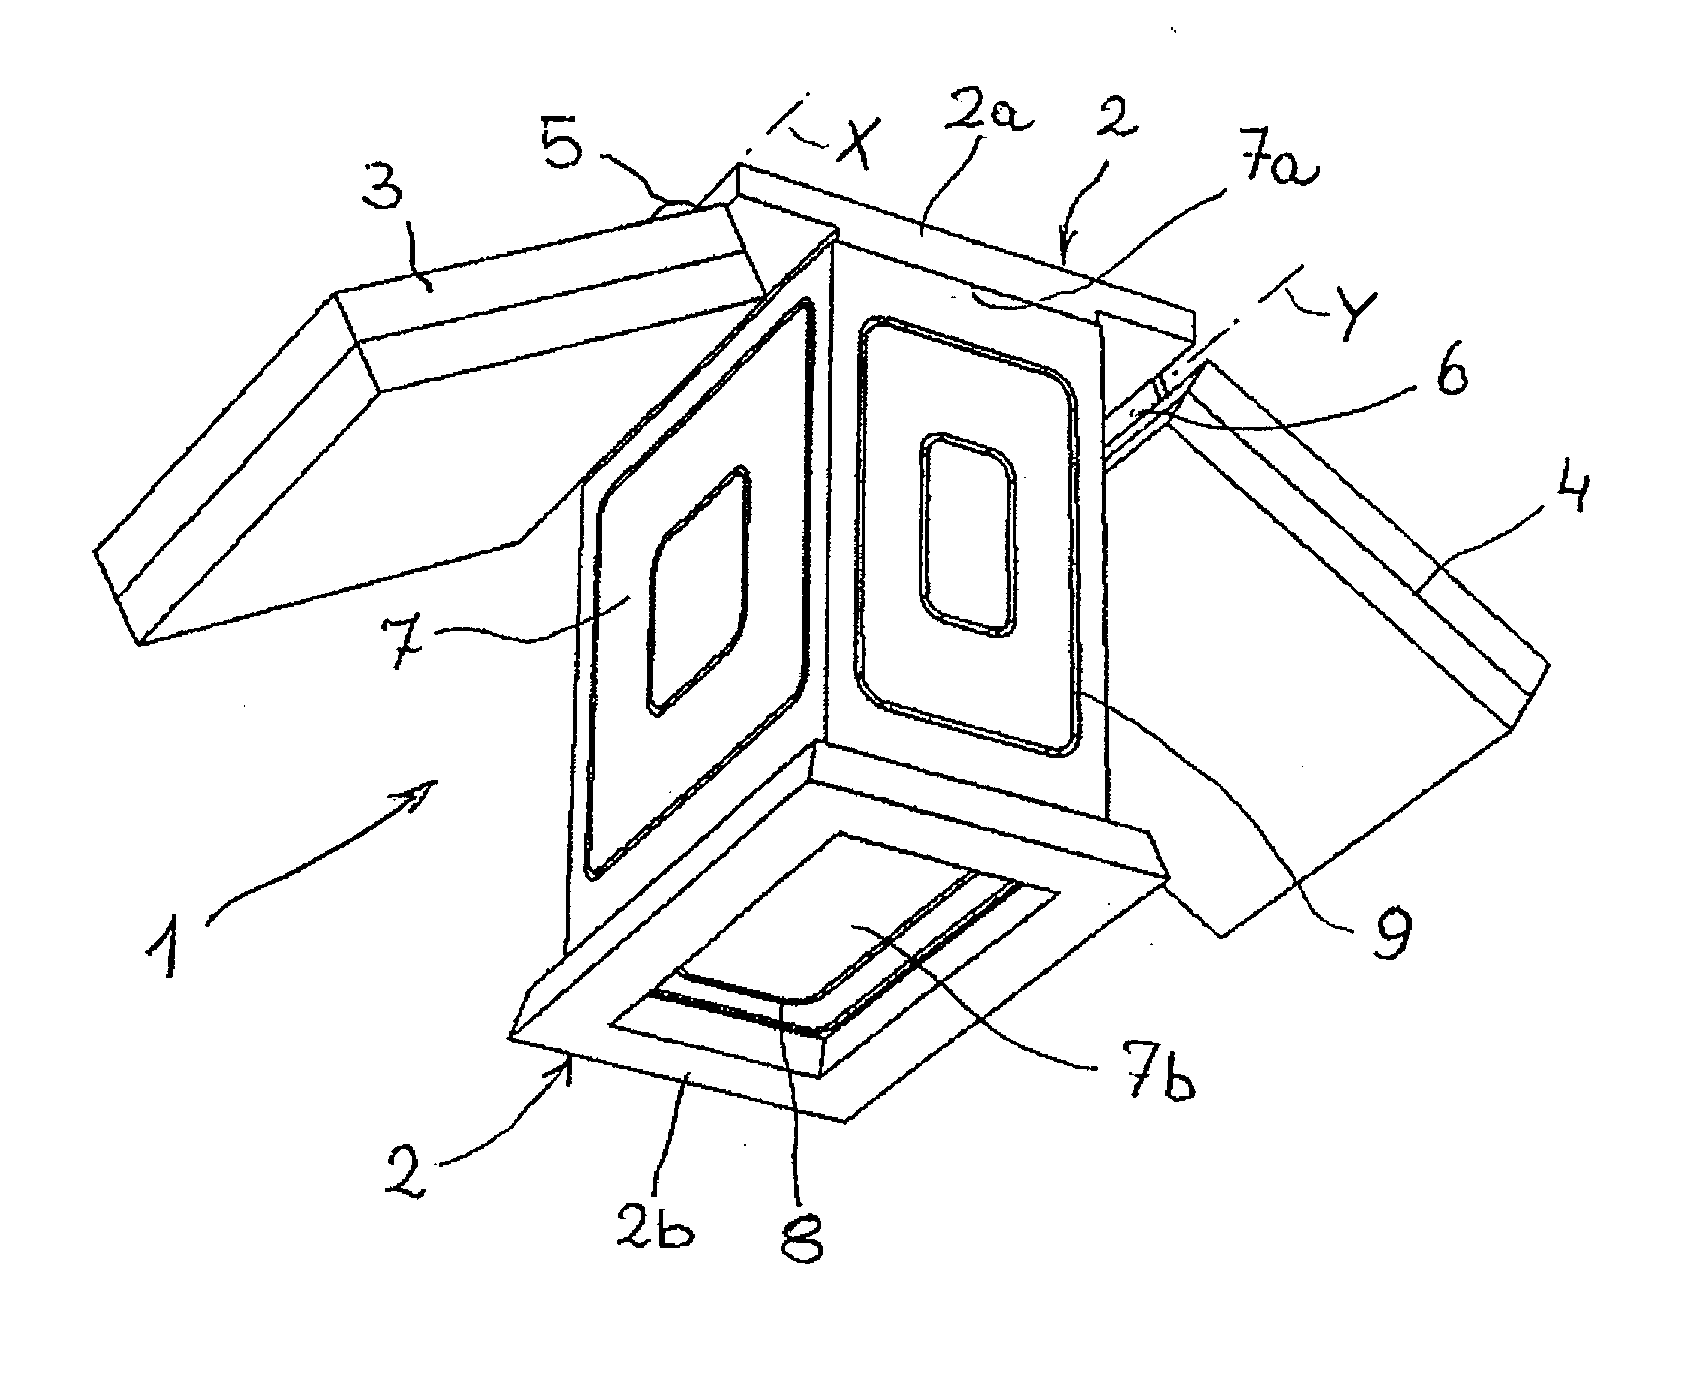 Miniaturized generator with oscillating magnets for the production of electric energy from vibrations